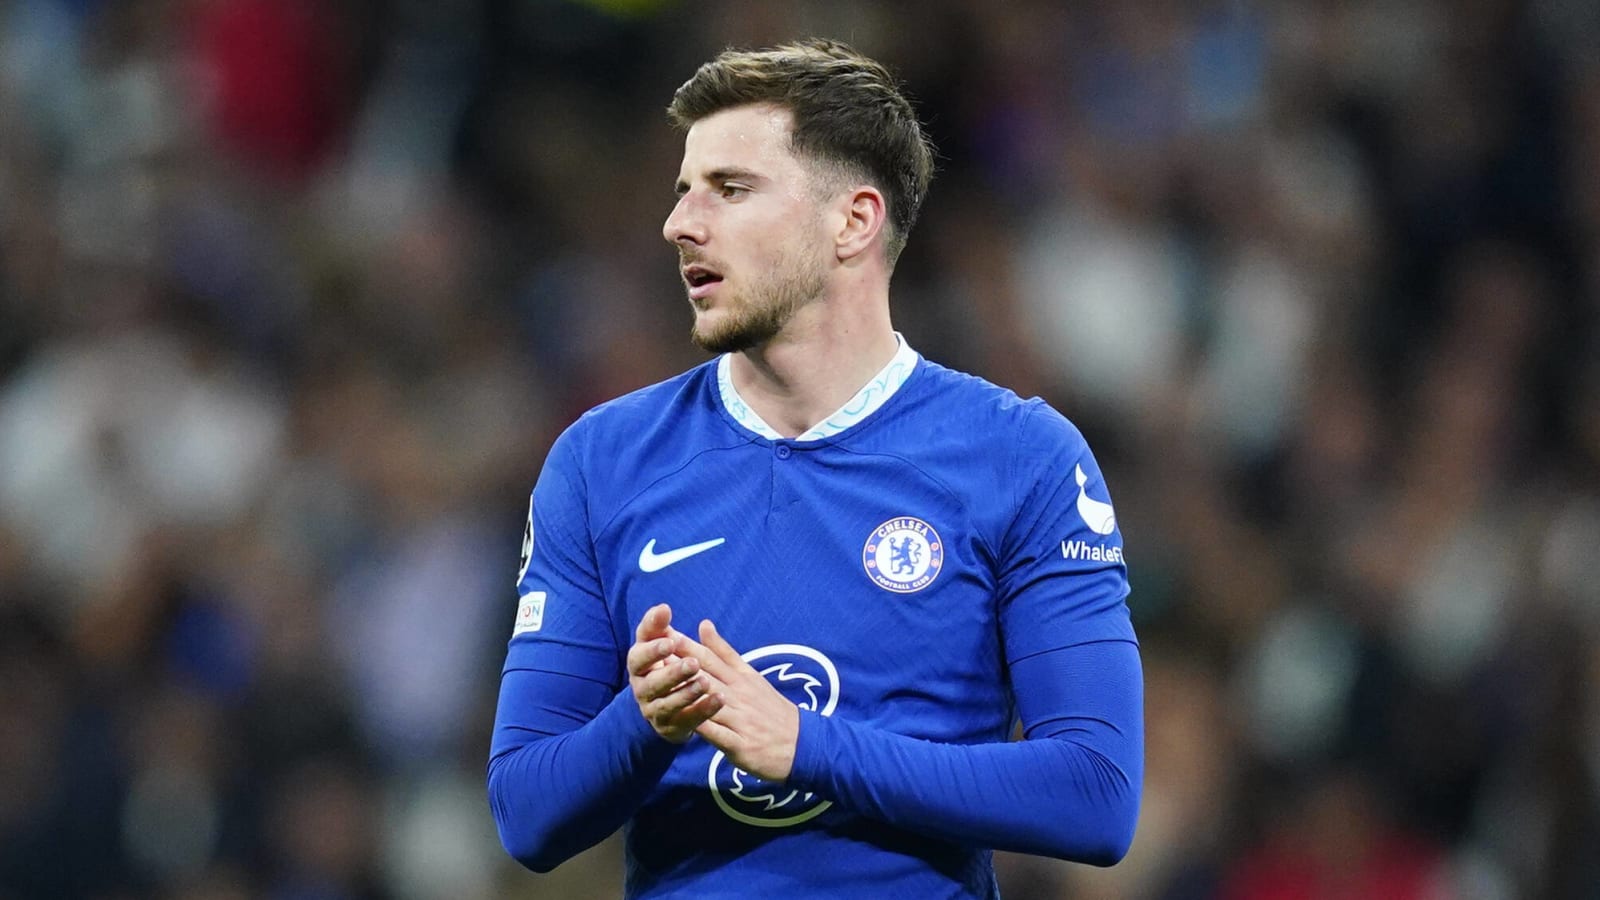 Exclusive claims Pochettino will have showdown talks with Chelsea player on arrival